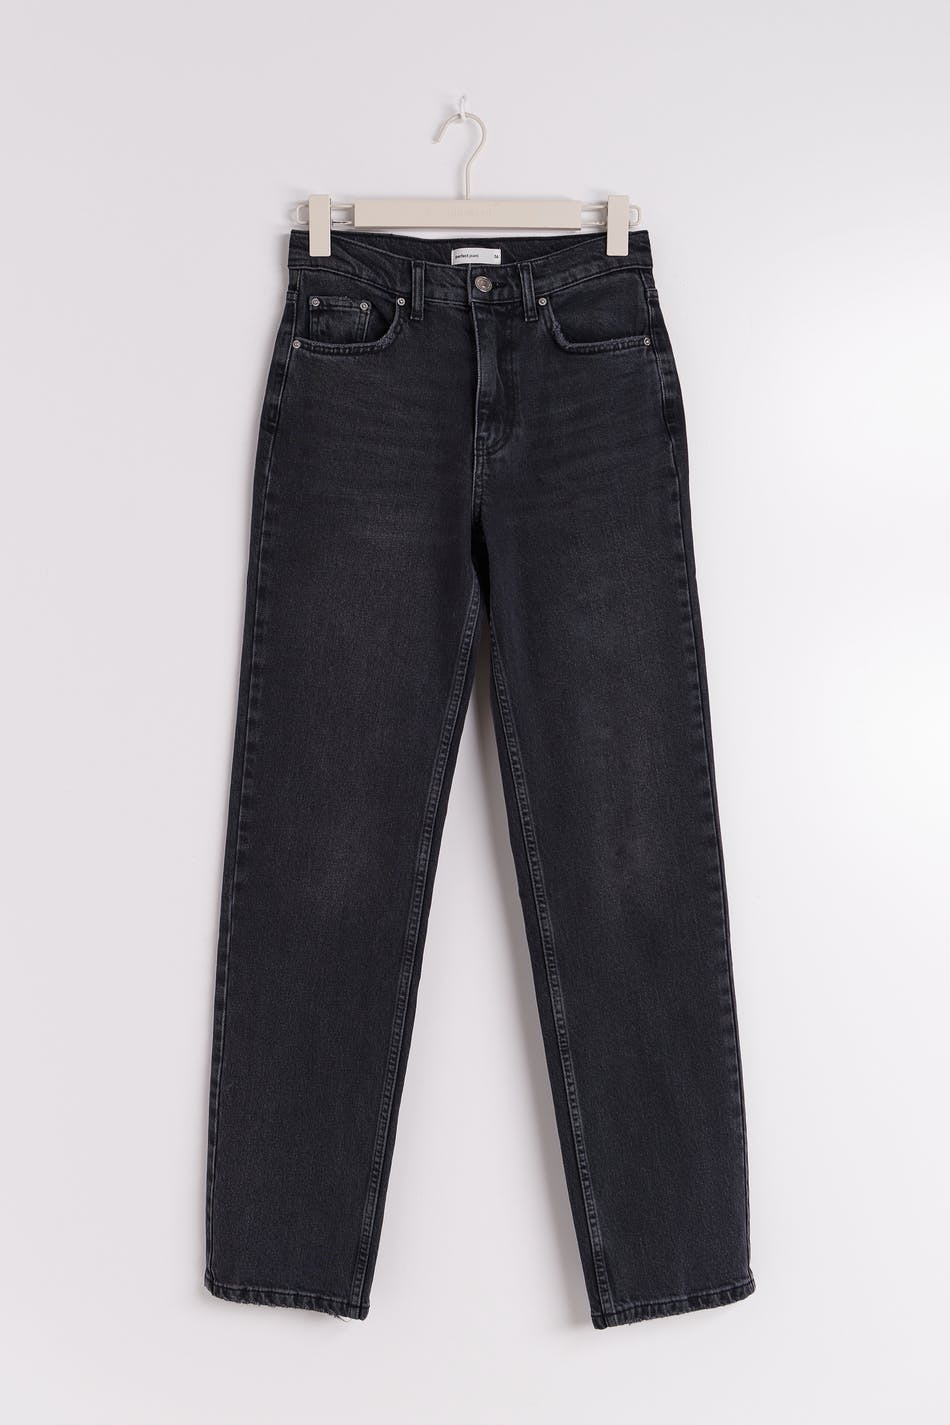 Gina Tricot - Mid straight tall jeans - mid waist jeans - Black - 32 - Female